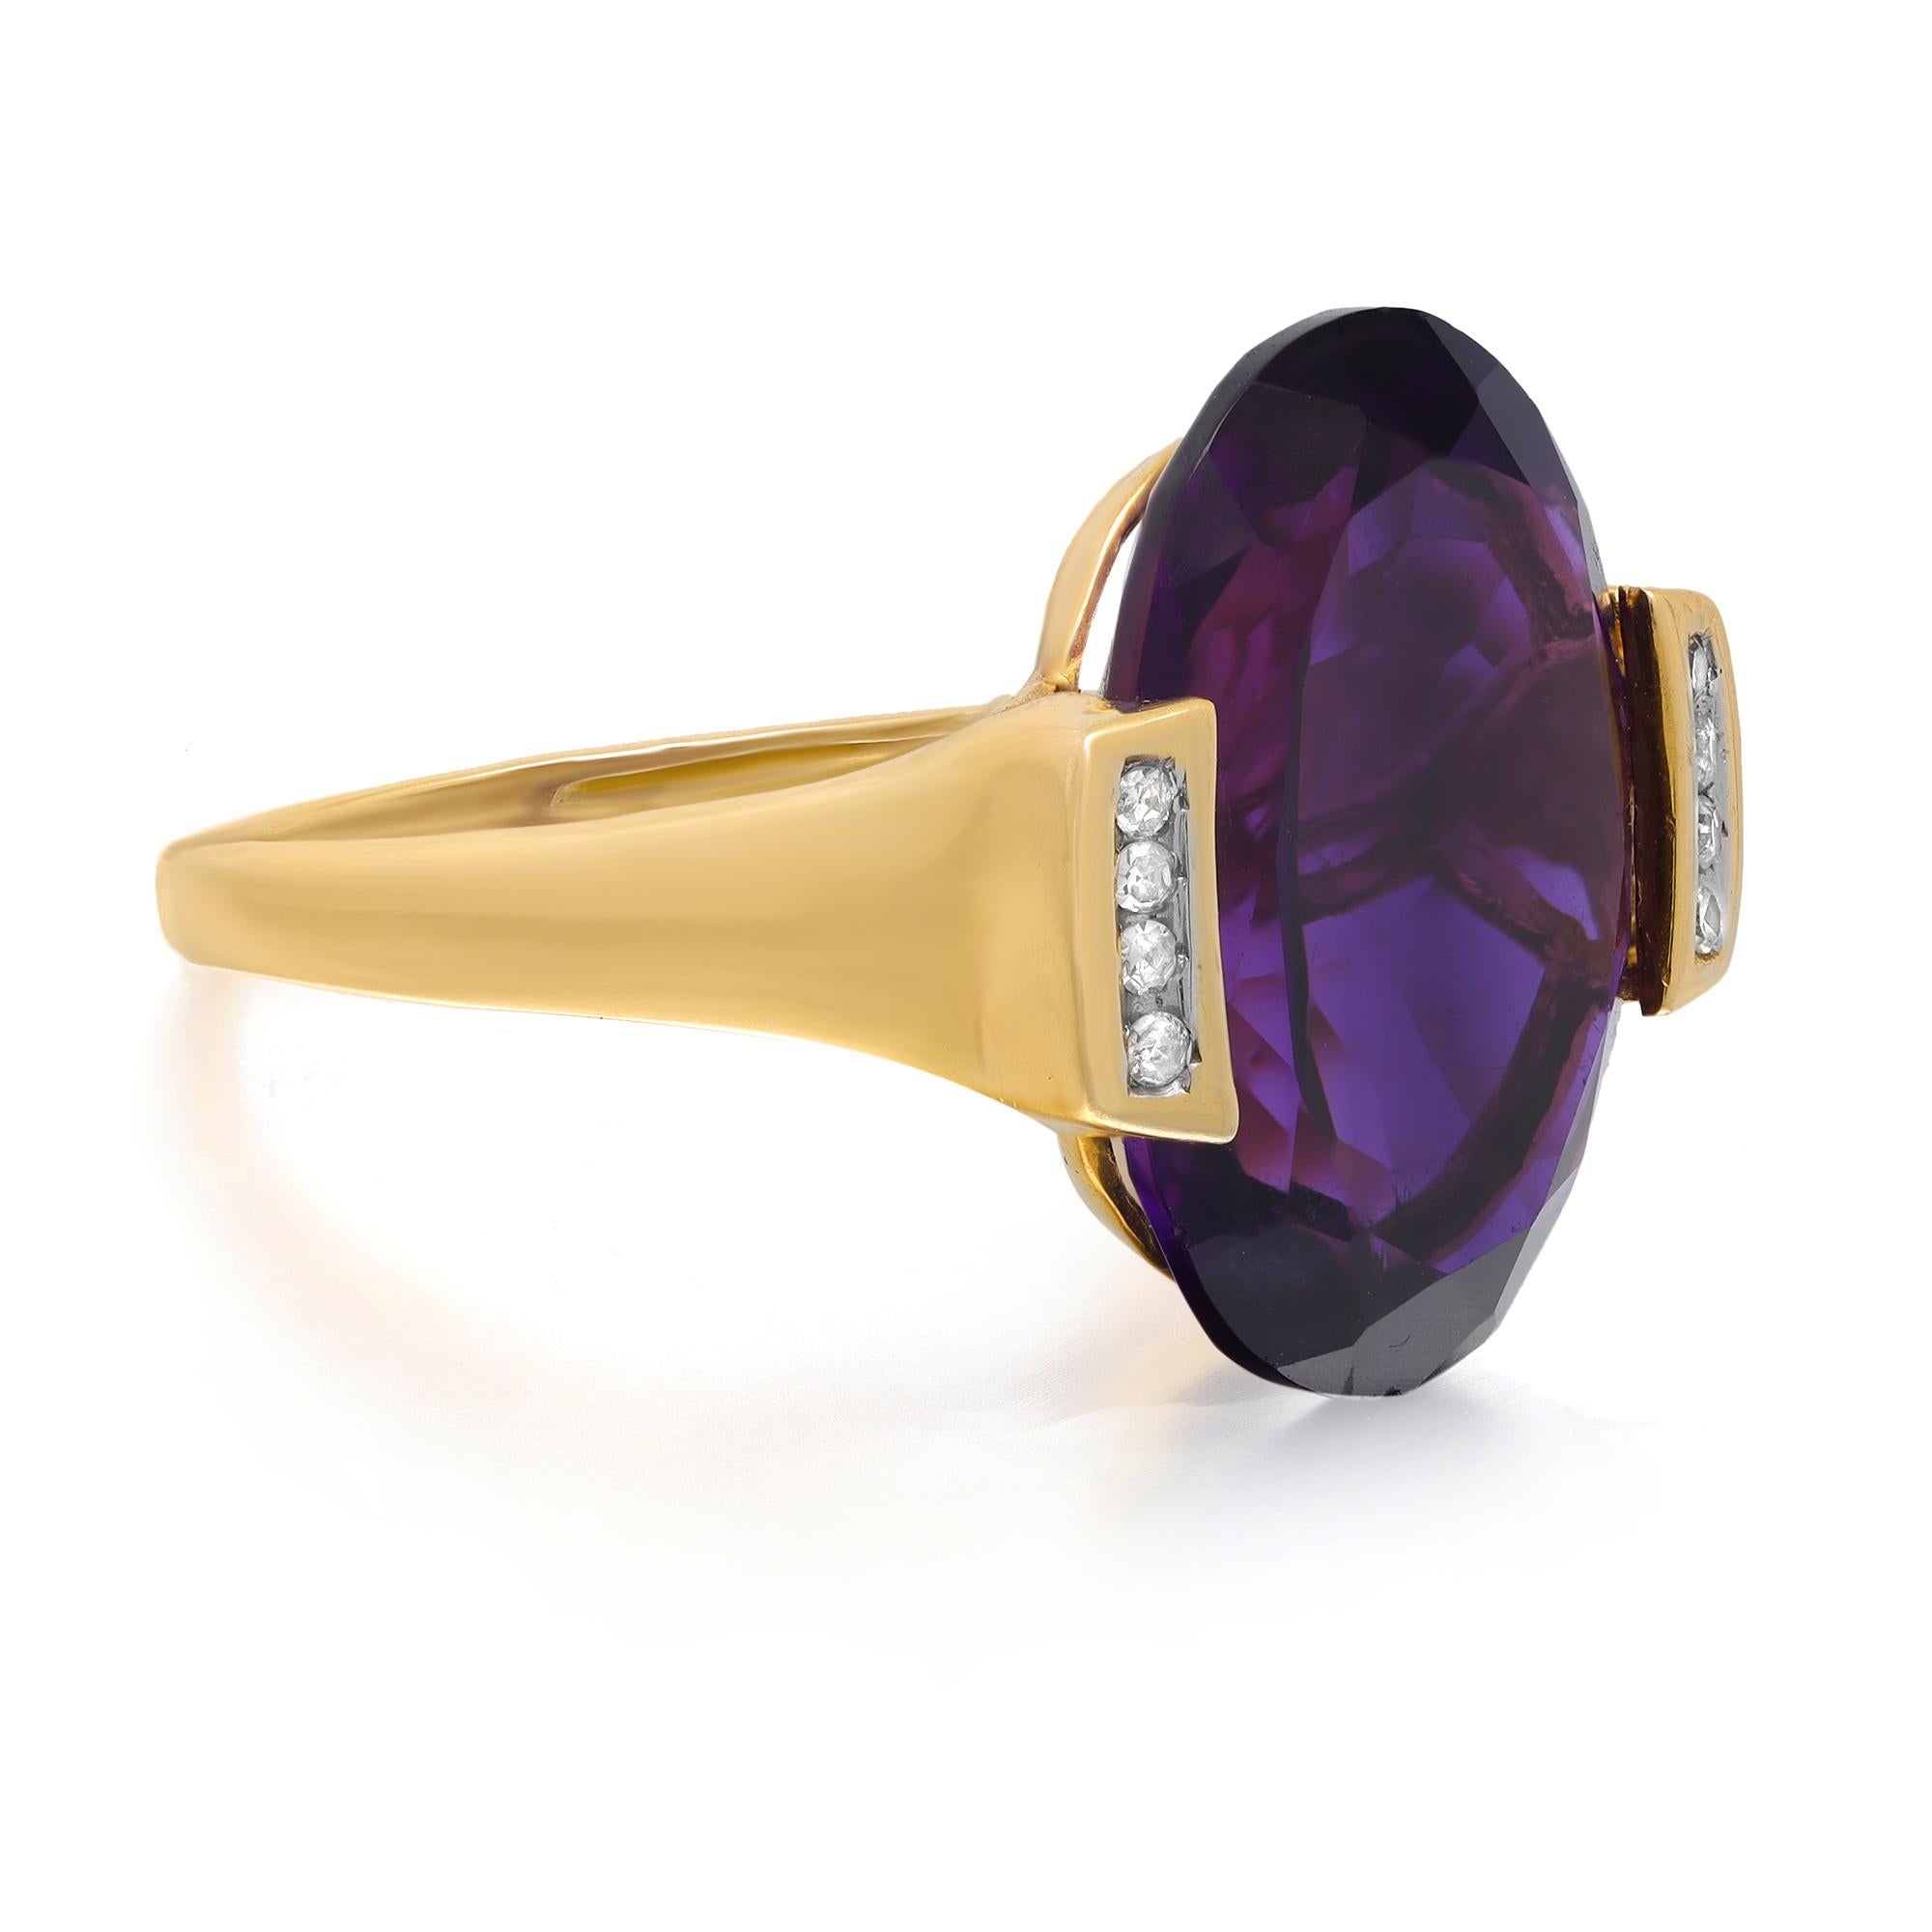 This beautiful purple oval shaped Amethyst and diamond cocktail ring is crafted in fine 14k yellow gold. An excellent oval shaped amethyst weighing approx. 11.00 carats is flanked with tiny round brilliant cut diamonds. Ring Size 7.75. Total weight: